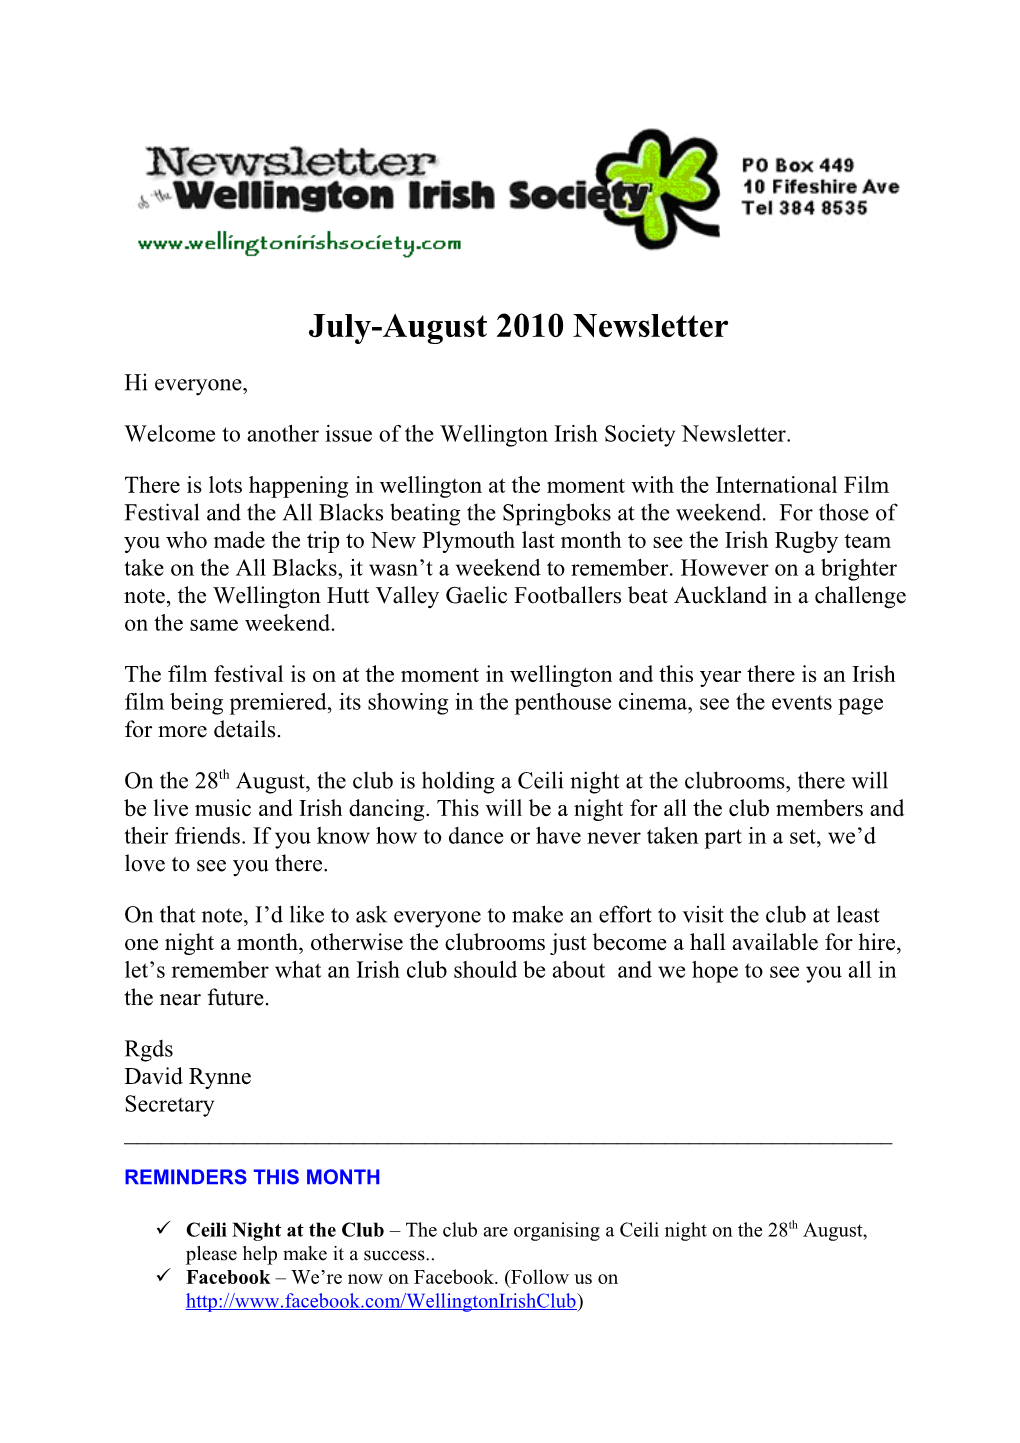 Welcome to Another Issue of the Wellington Irish Society Newsletter